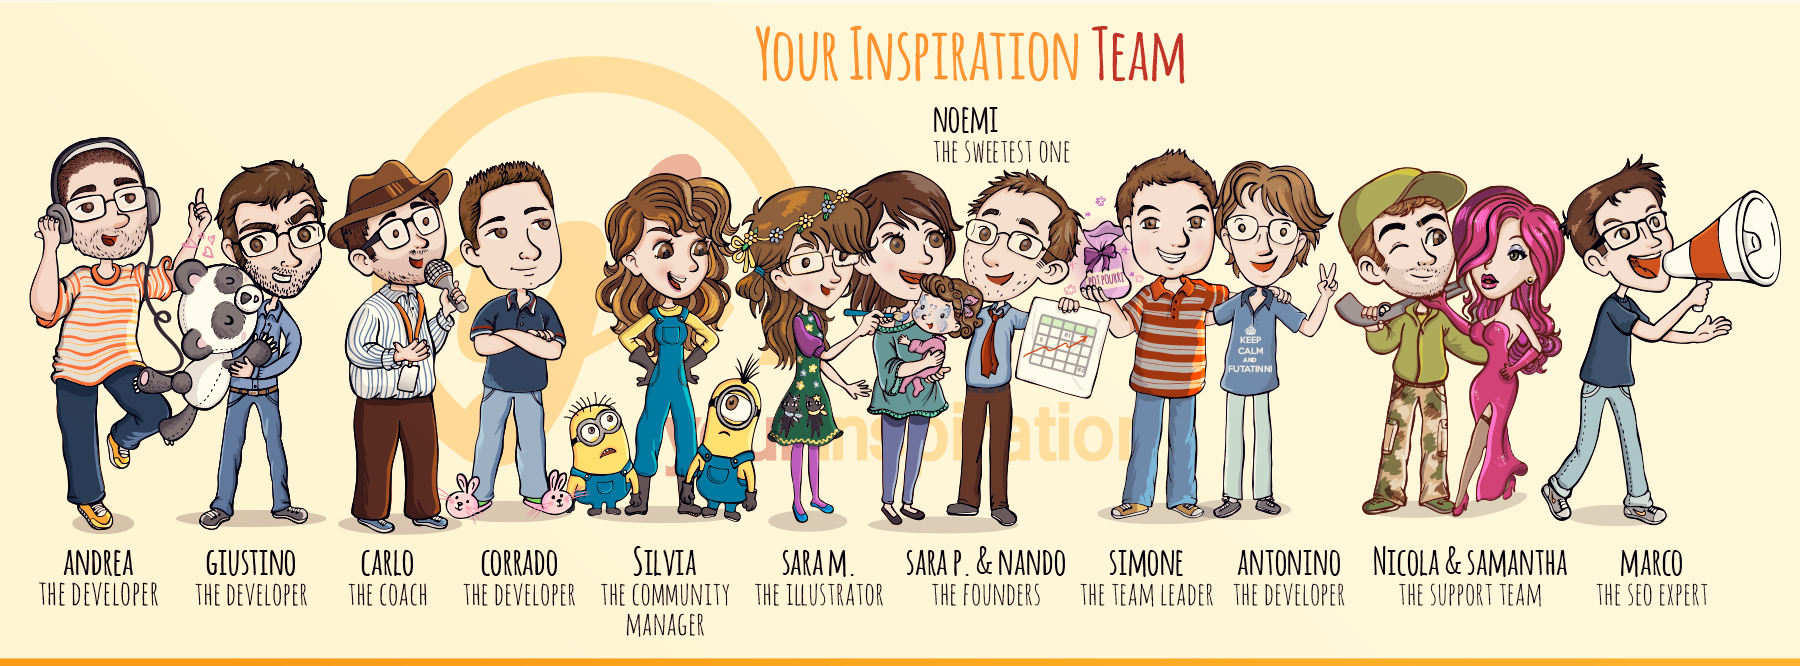 Your Inspiration Team